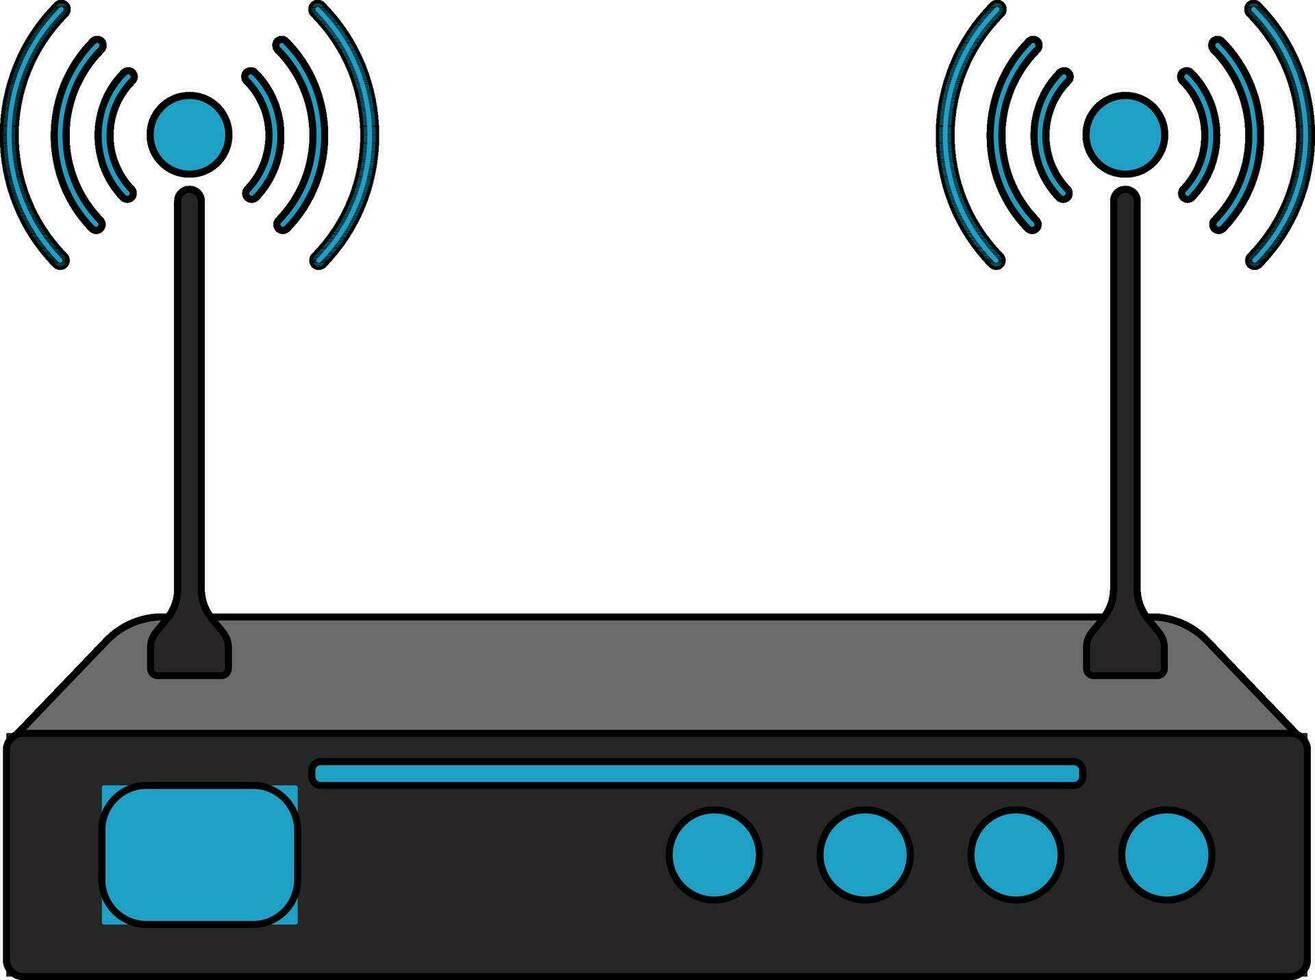 Flat style router in grey and blue color. vector